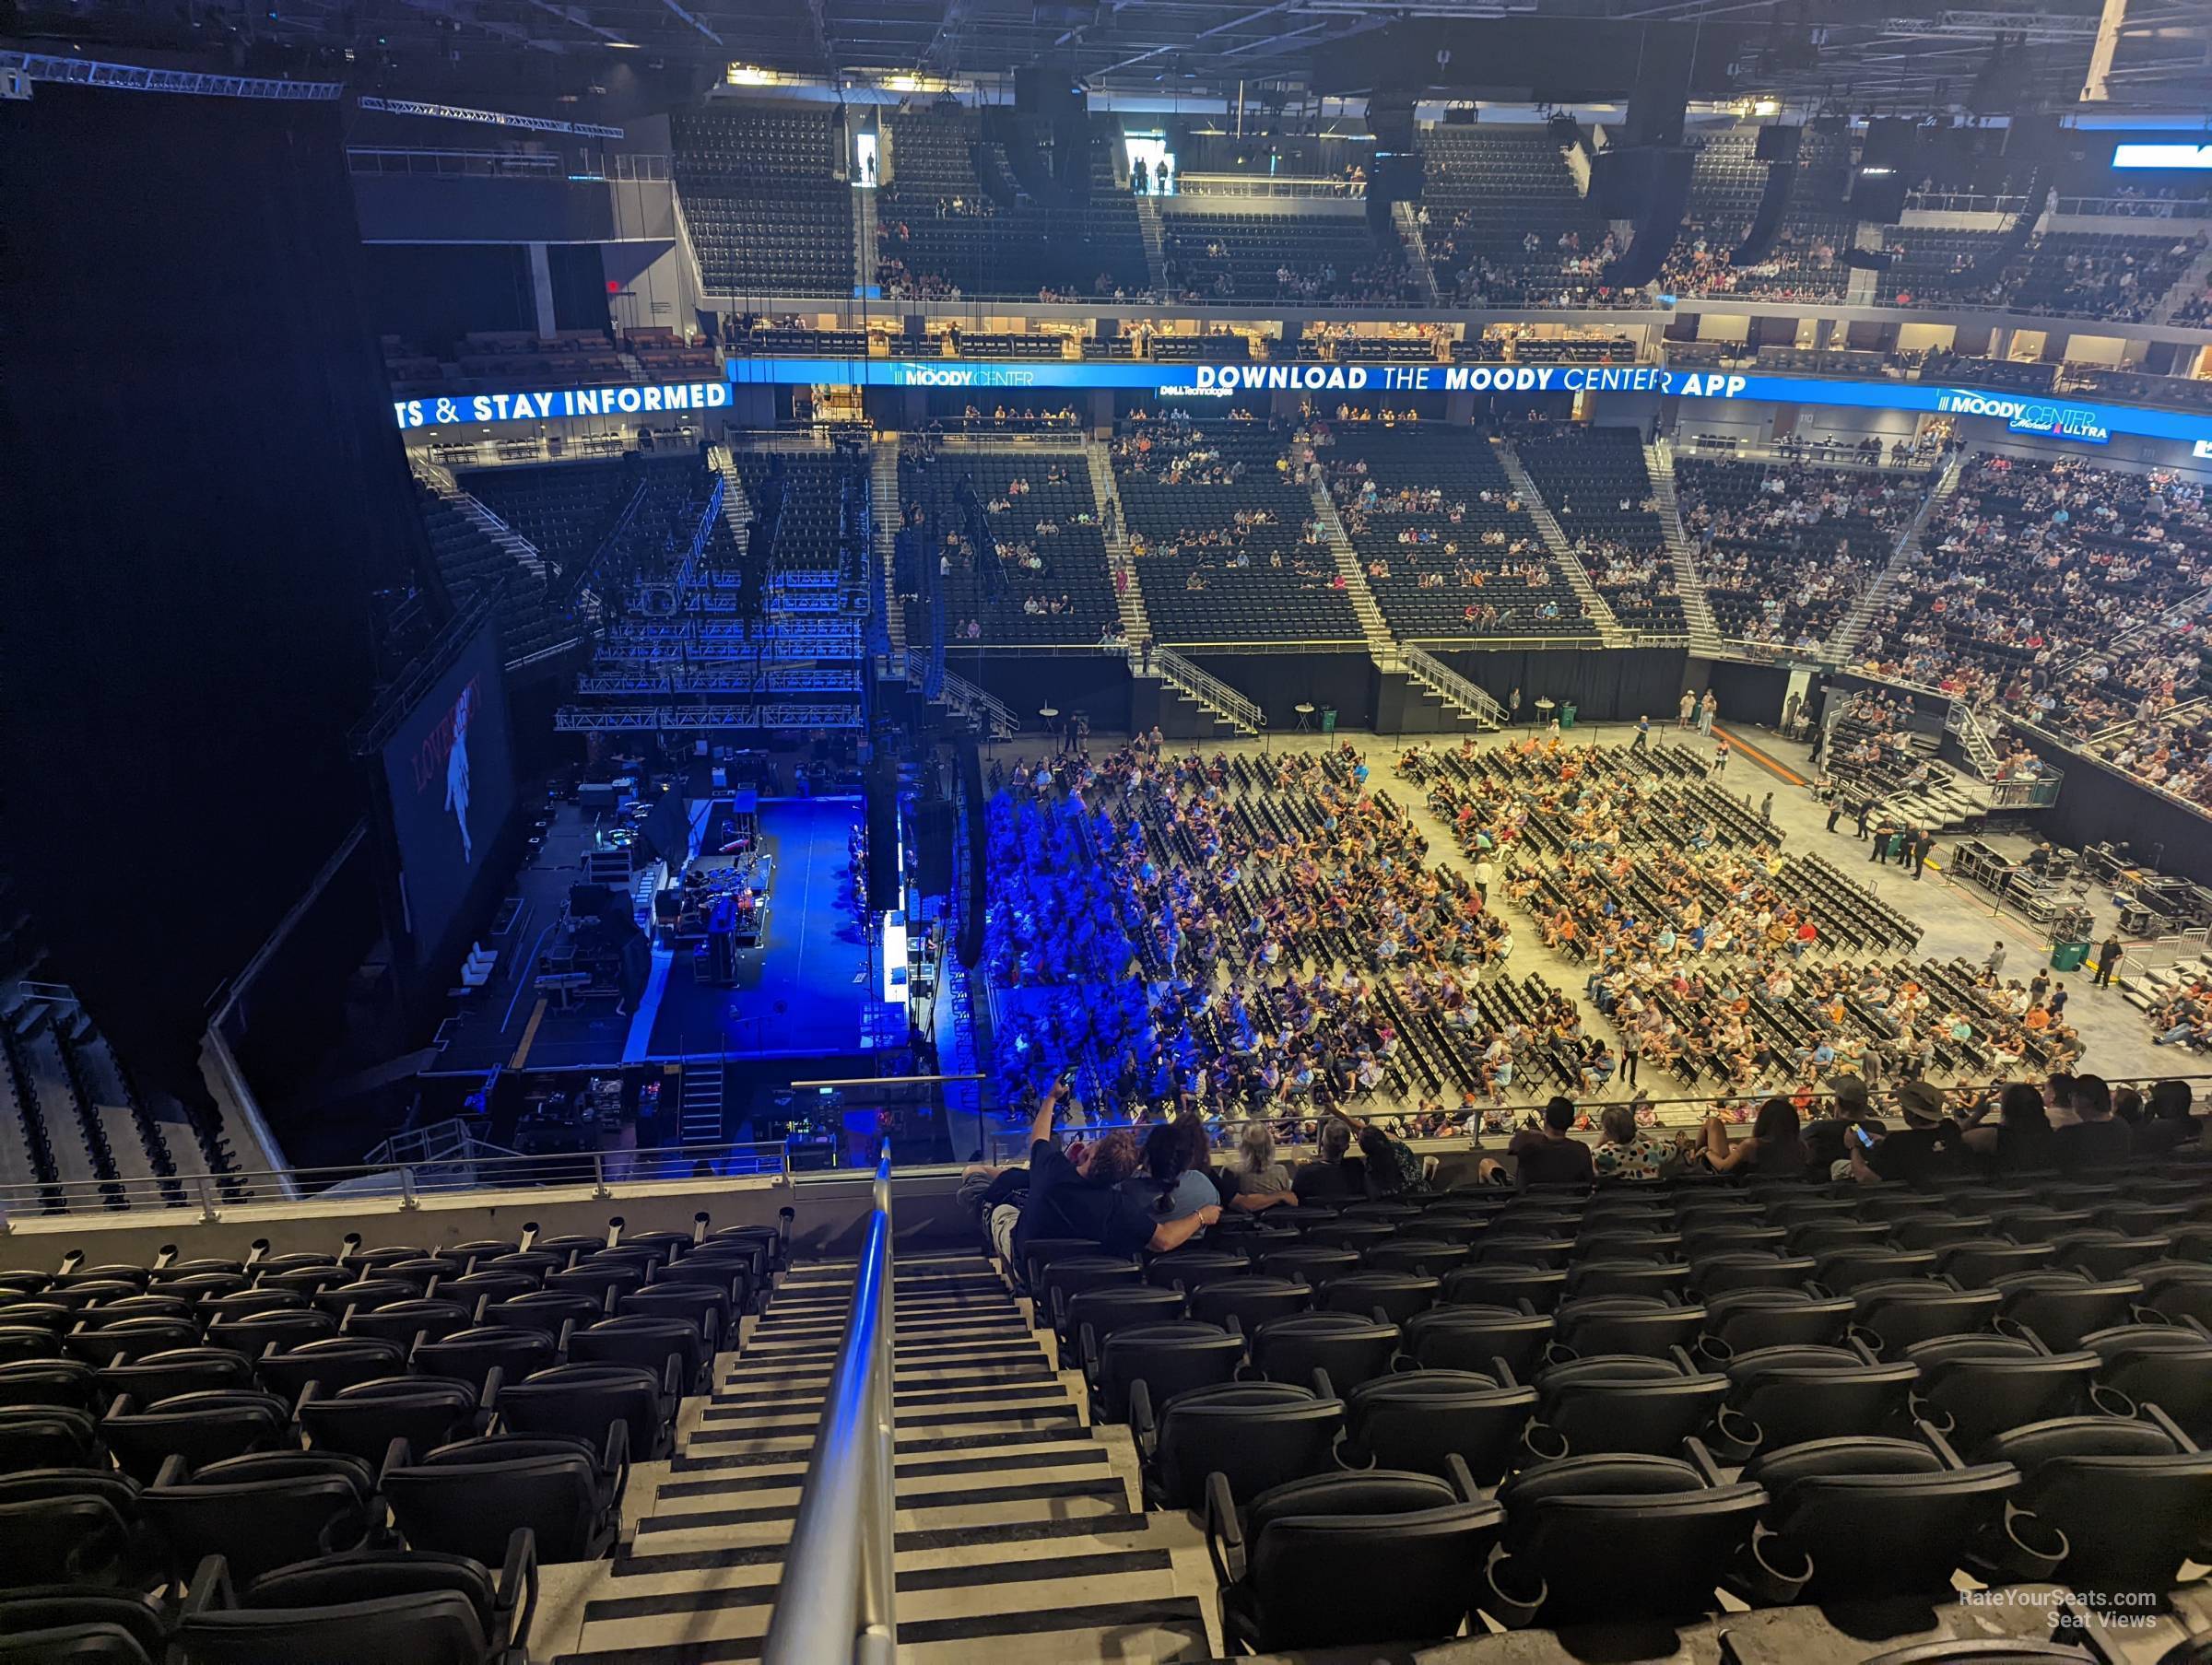 section 220, row k seat view  for concert - moody center atx